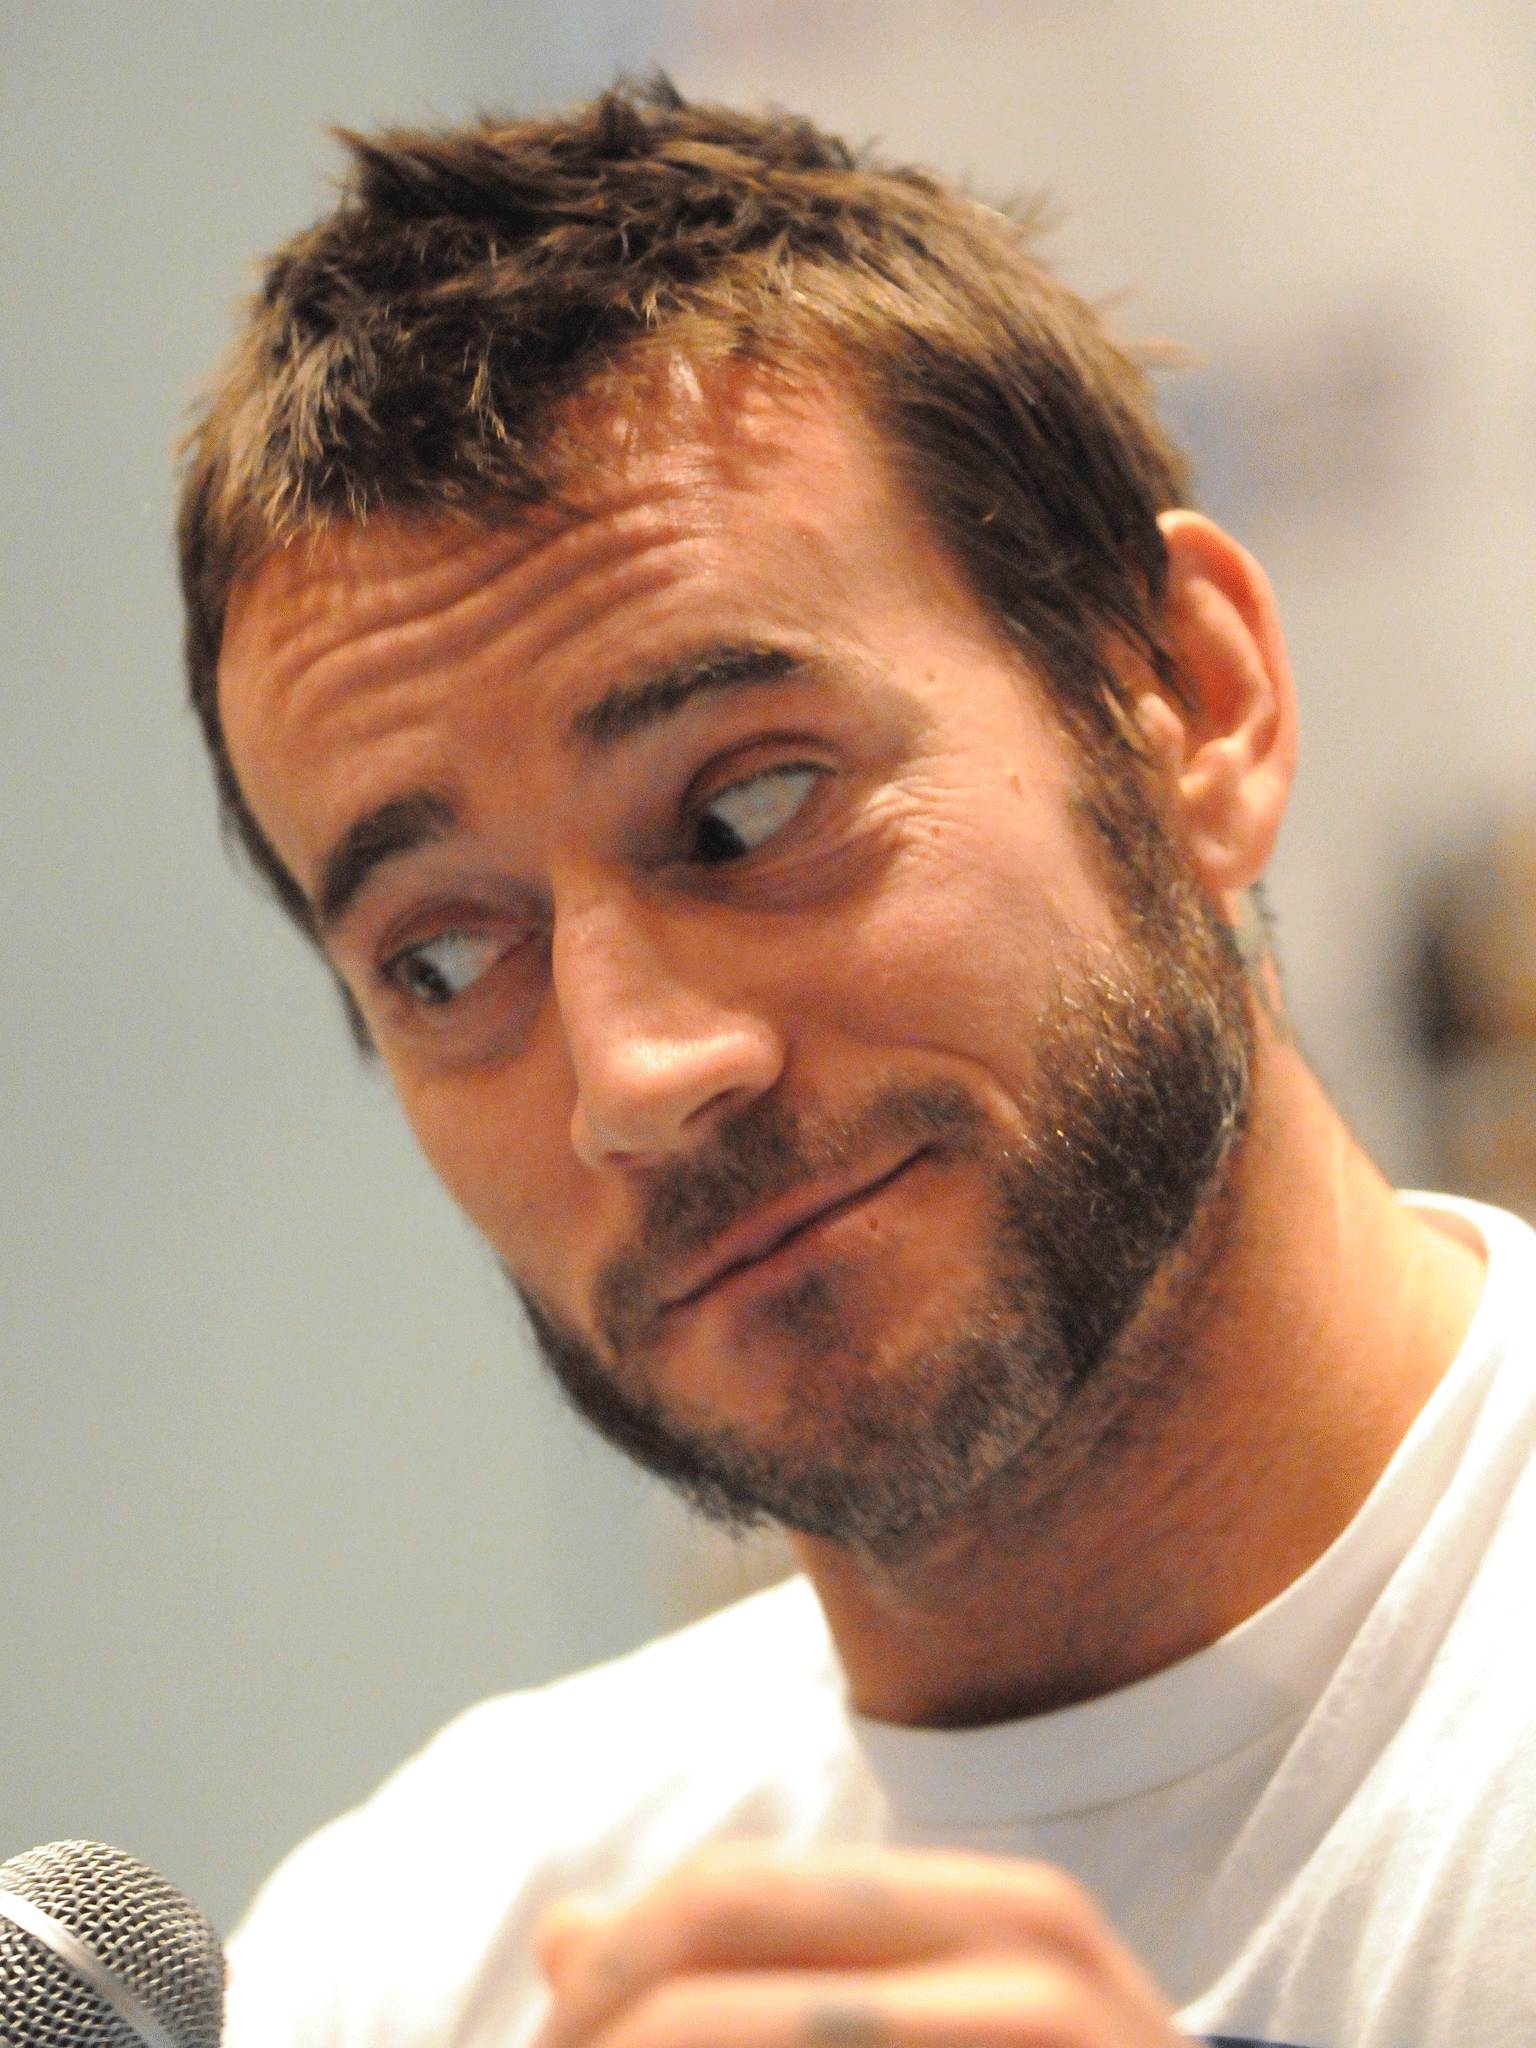 CM Punk has had a troubled relationship with the WWE